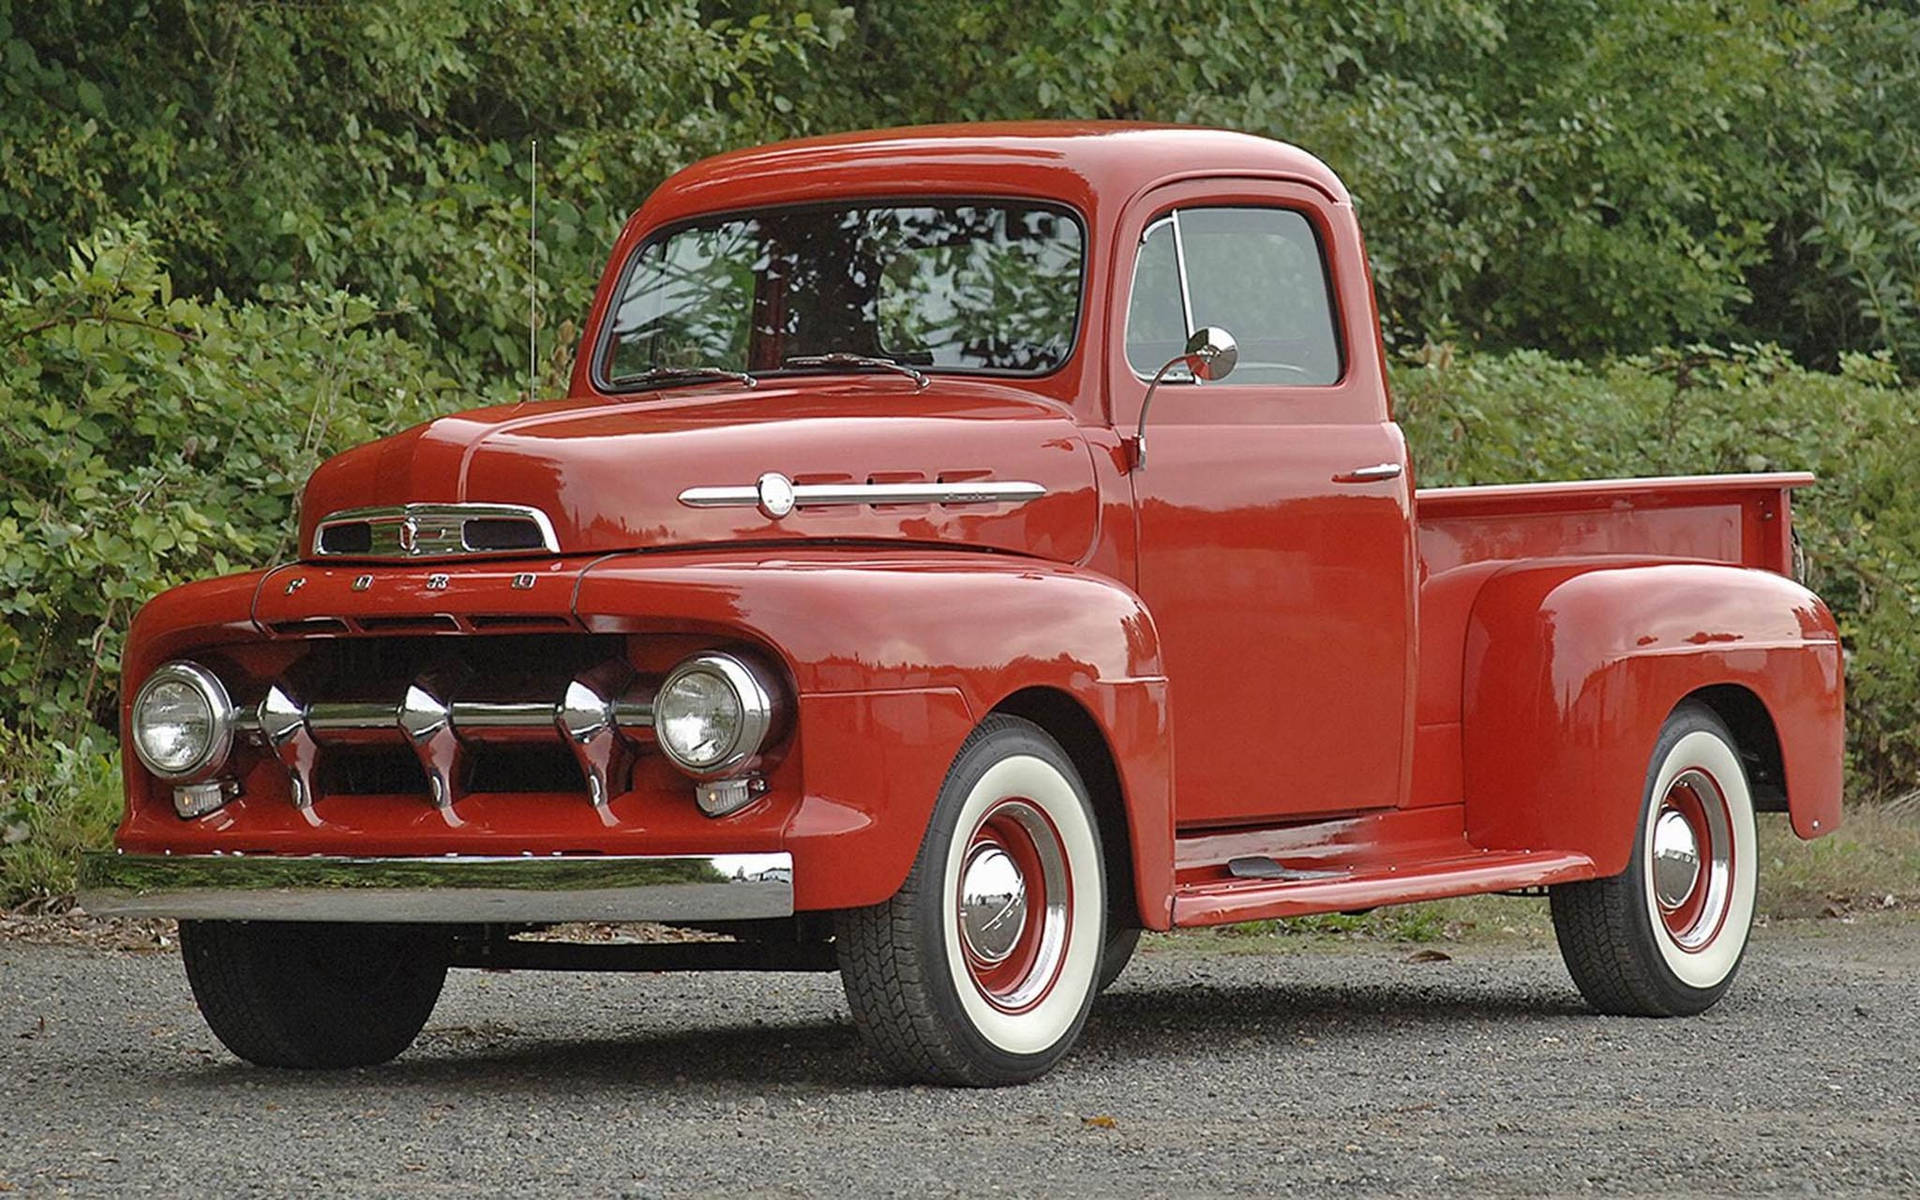 First Generation Old Ford Truck Wallpaper